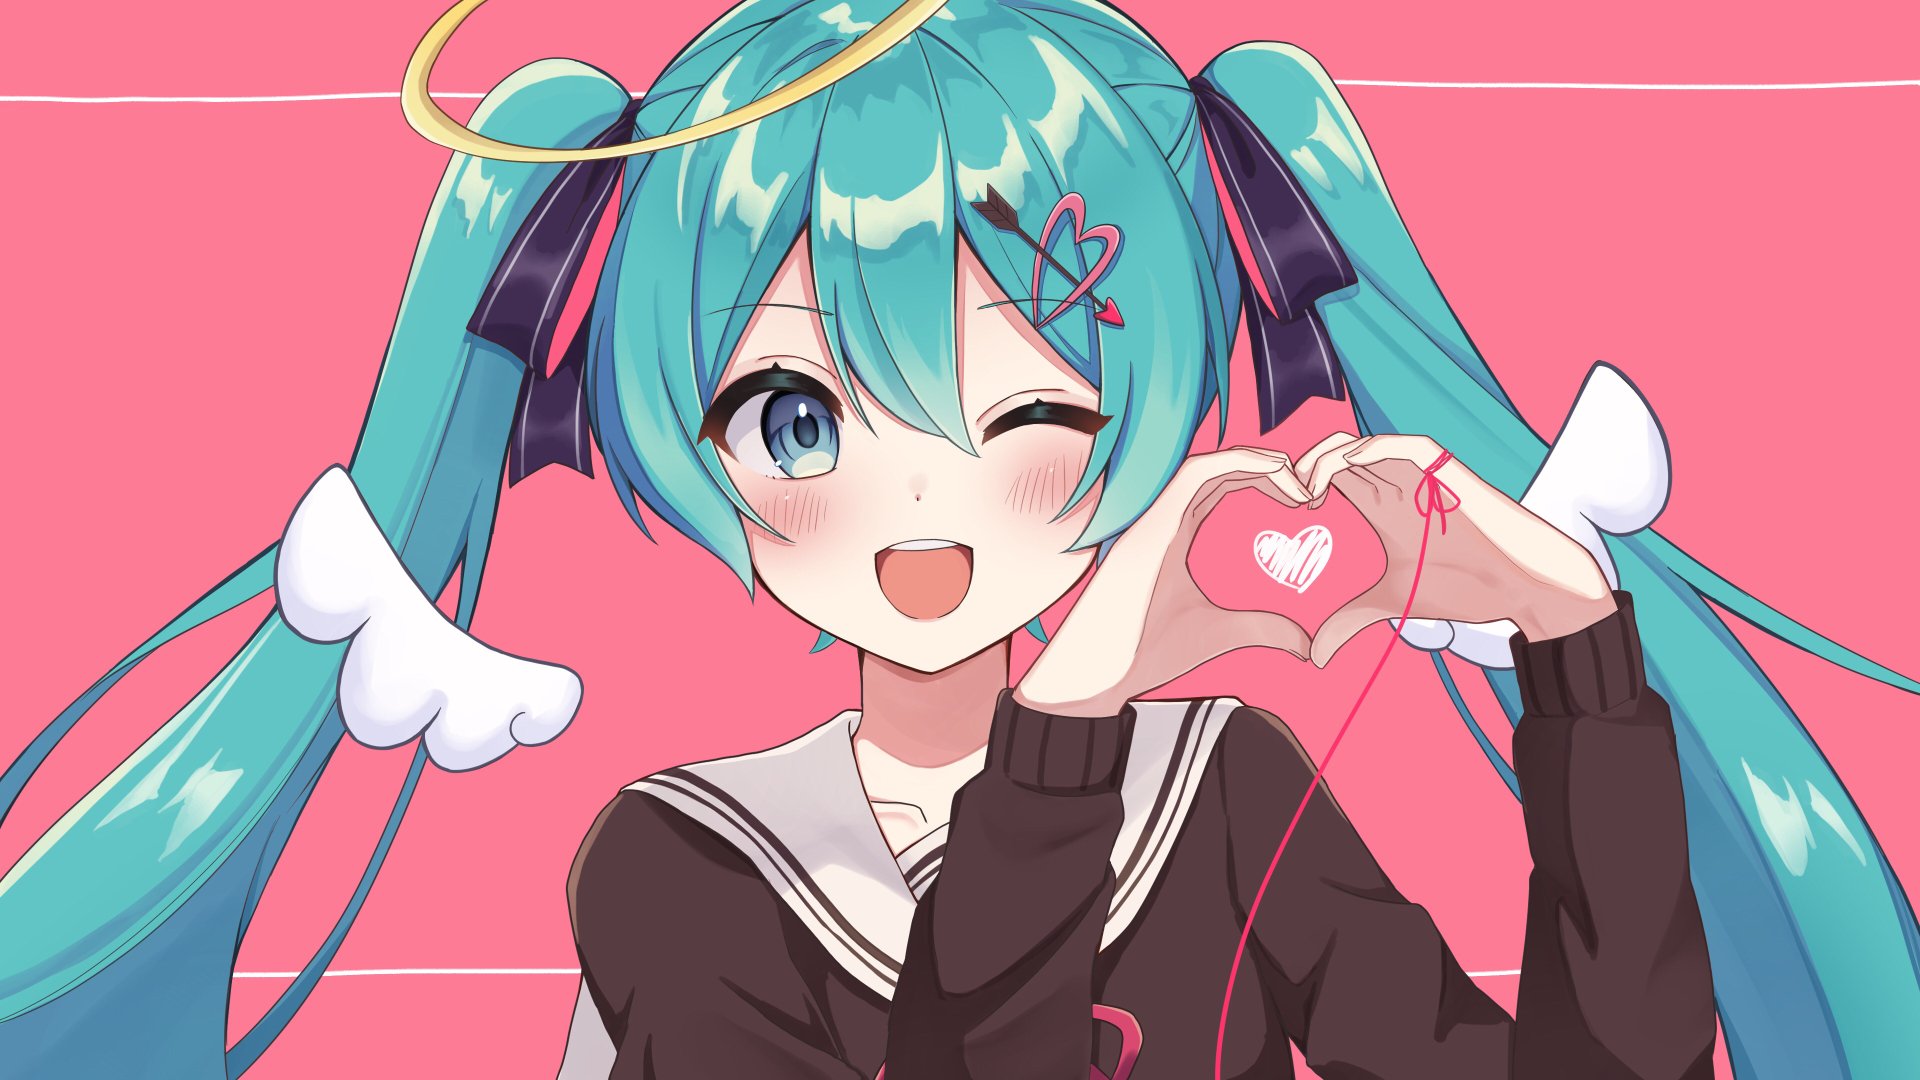 1080x2280 Hatsune Miku Vocaloid Anime Girl 4k One Plus 6,Huawei p20,Honor  view 10,Vivo y85,Oppo f7,Xiaomi Mi A2 HD 4k Wallpapers, Images,  Backgrounds, Photos and Pictures